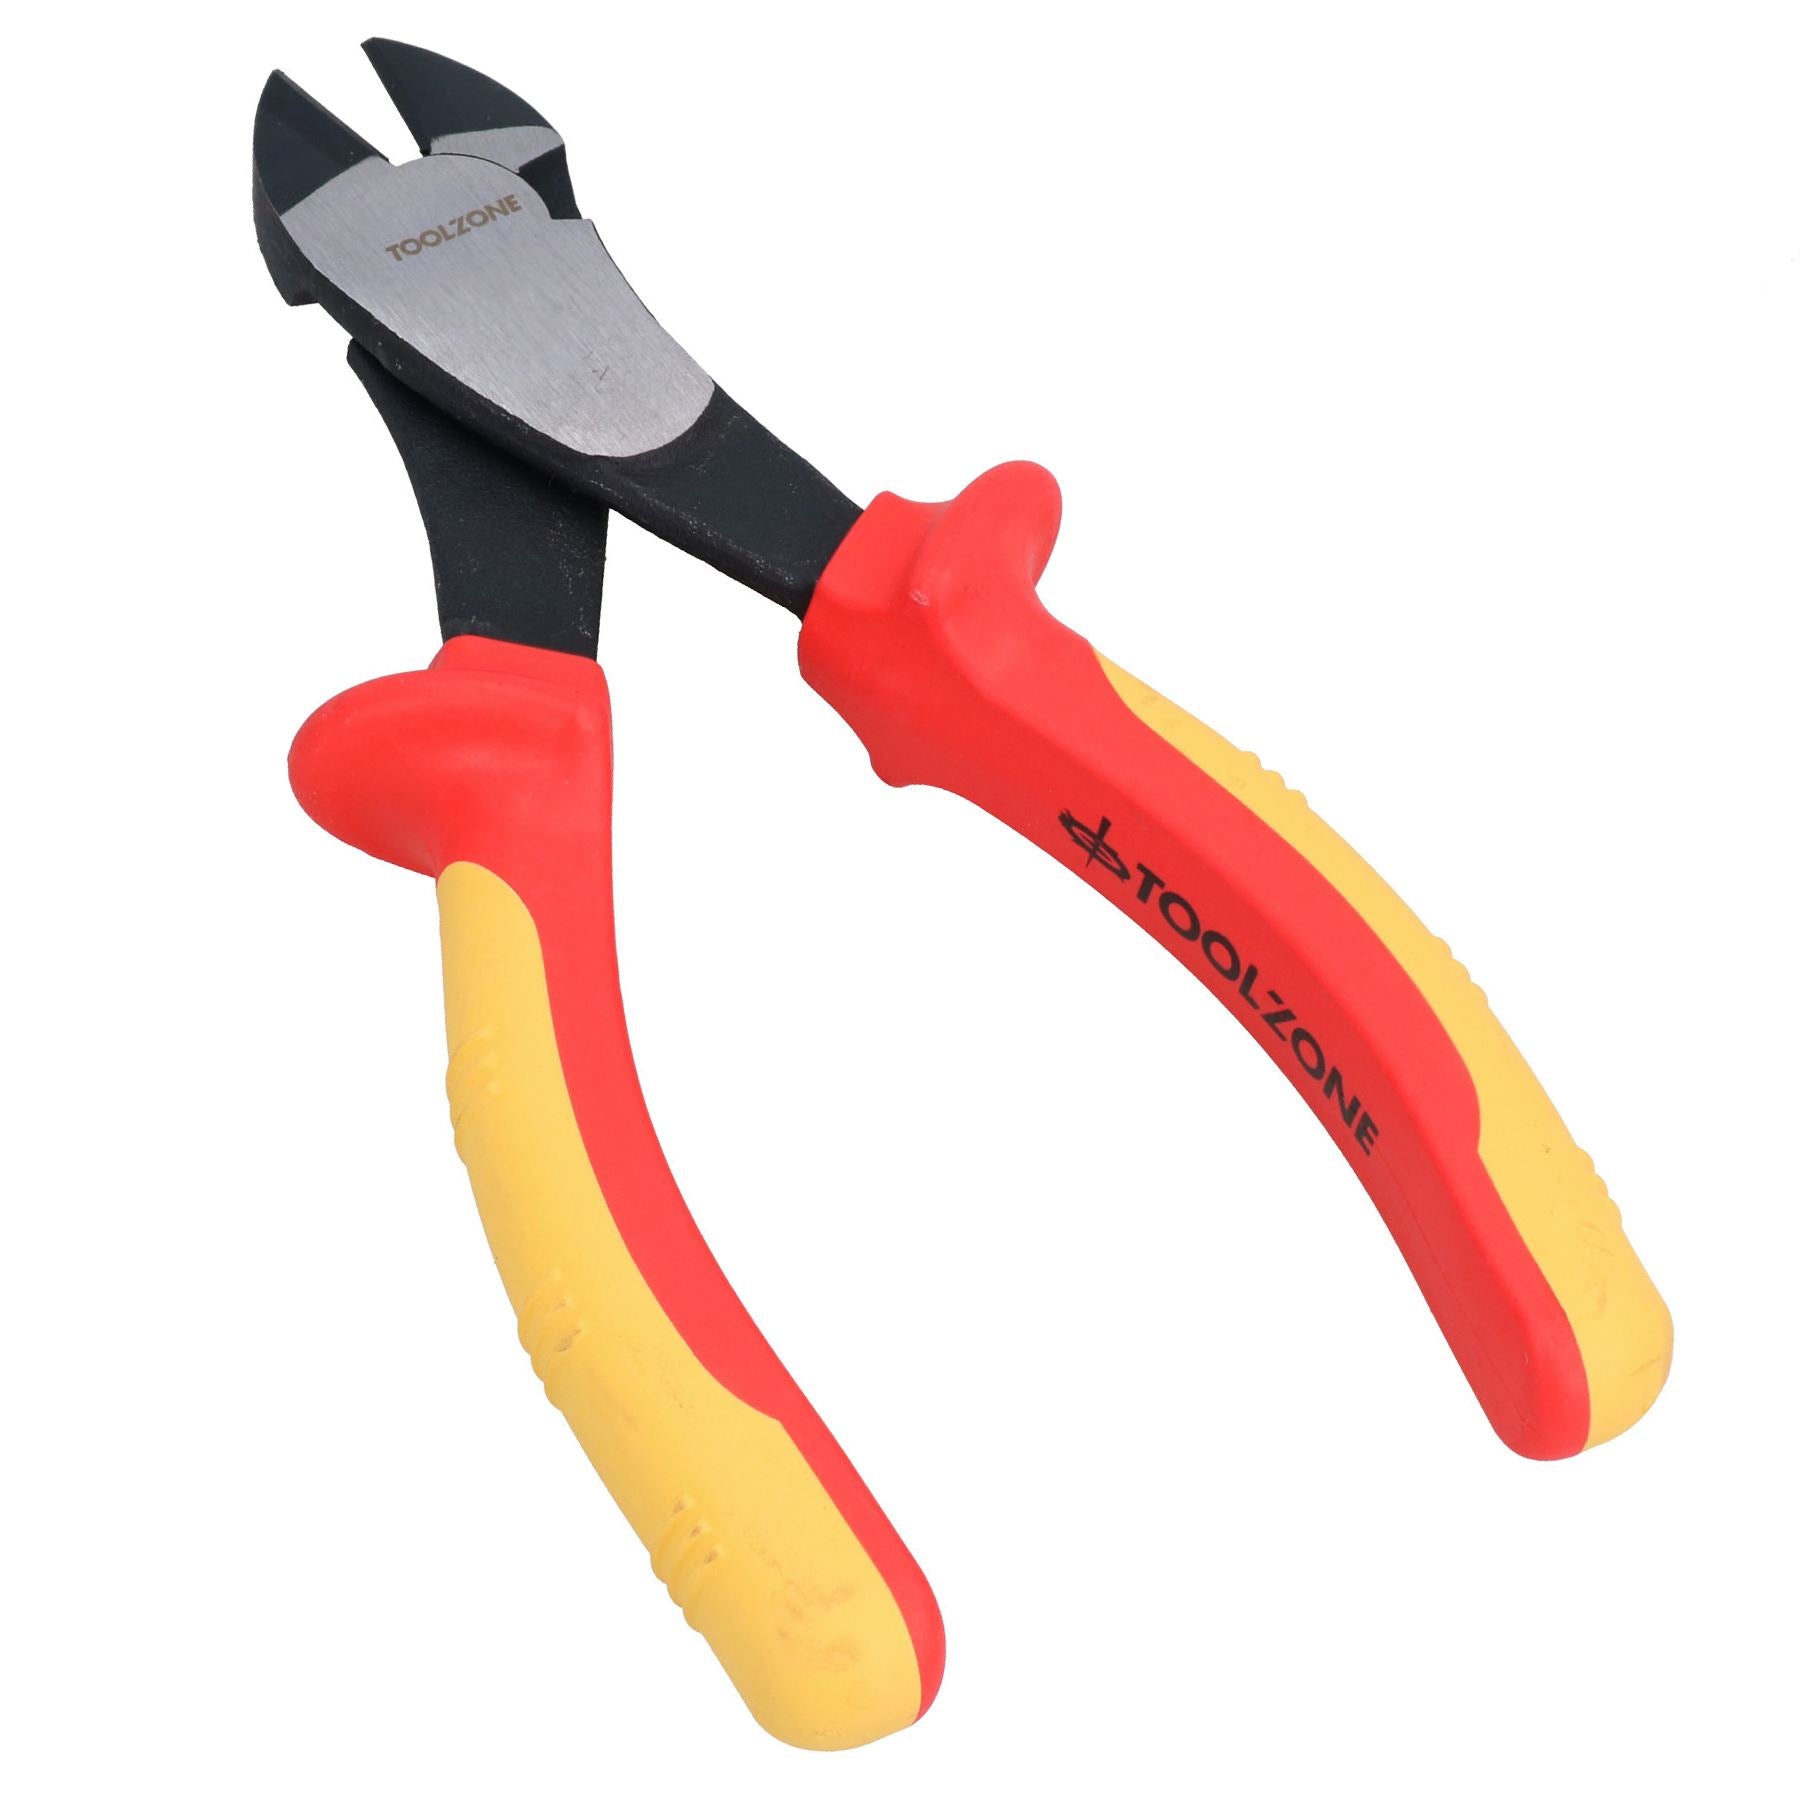 7.5” VDE Electrician Electrical Diagonal Side Wire Cutting Cutter Cut Snips Pliers